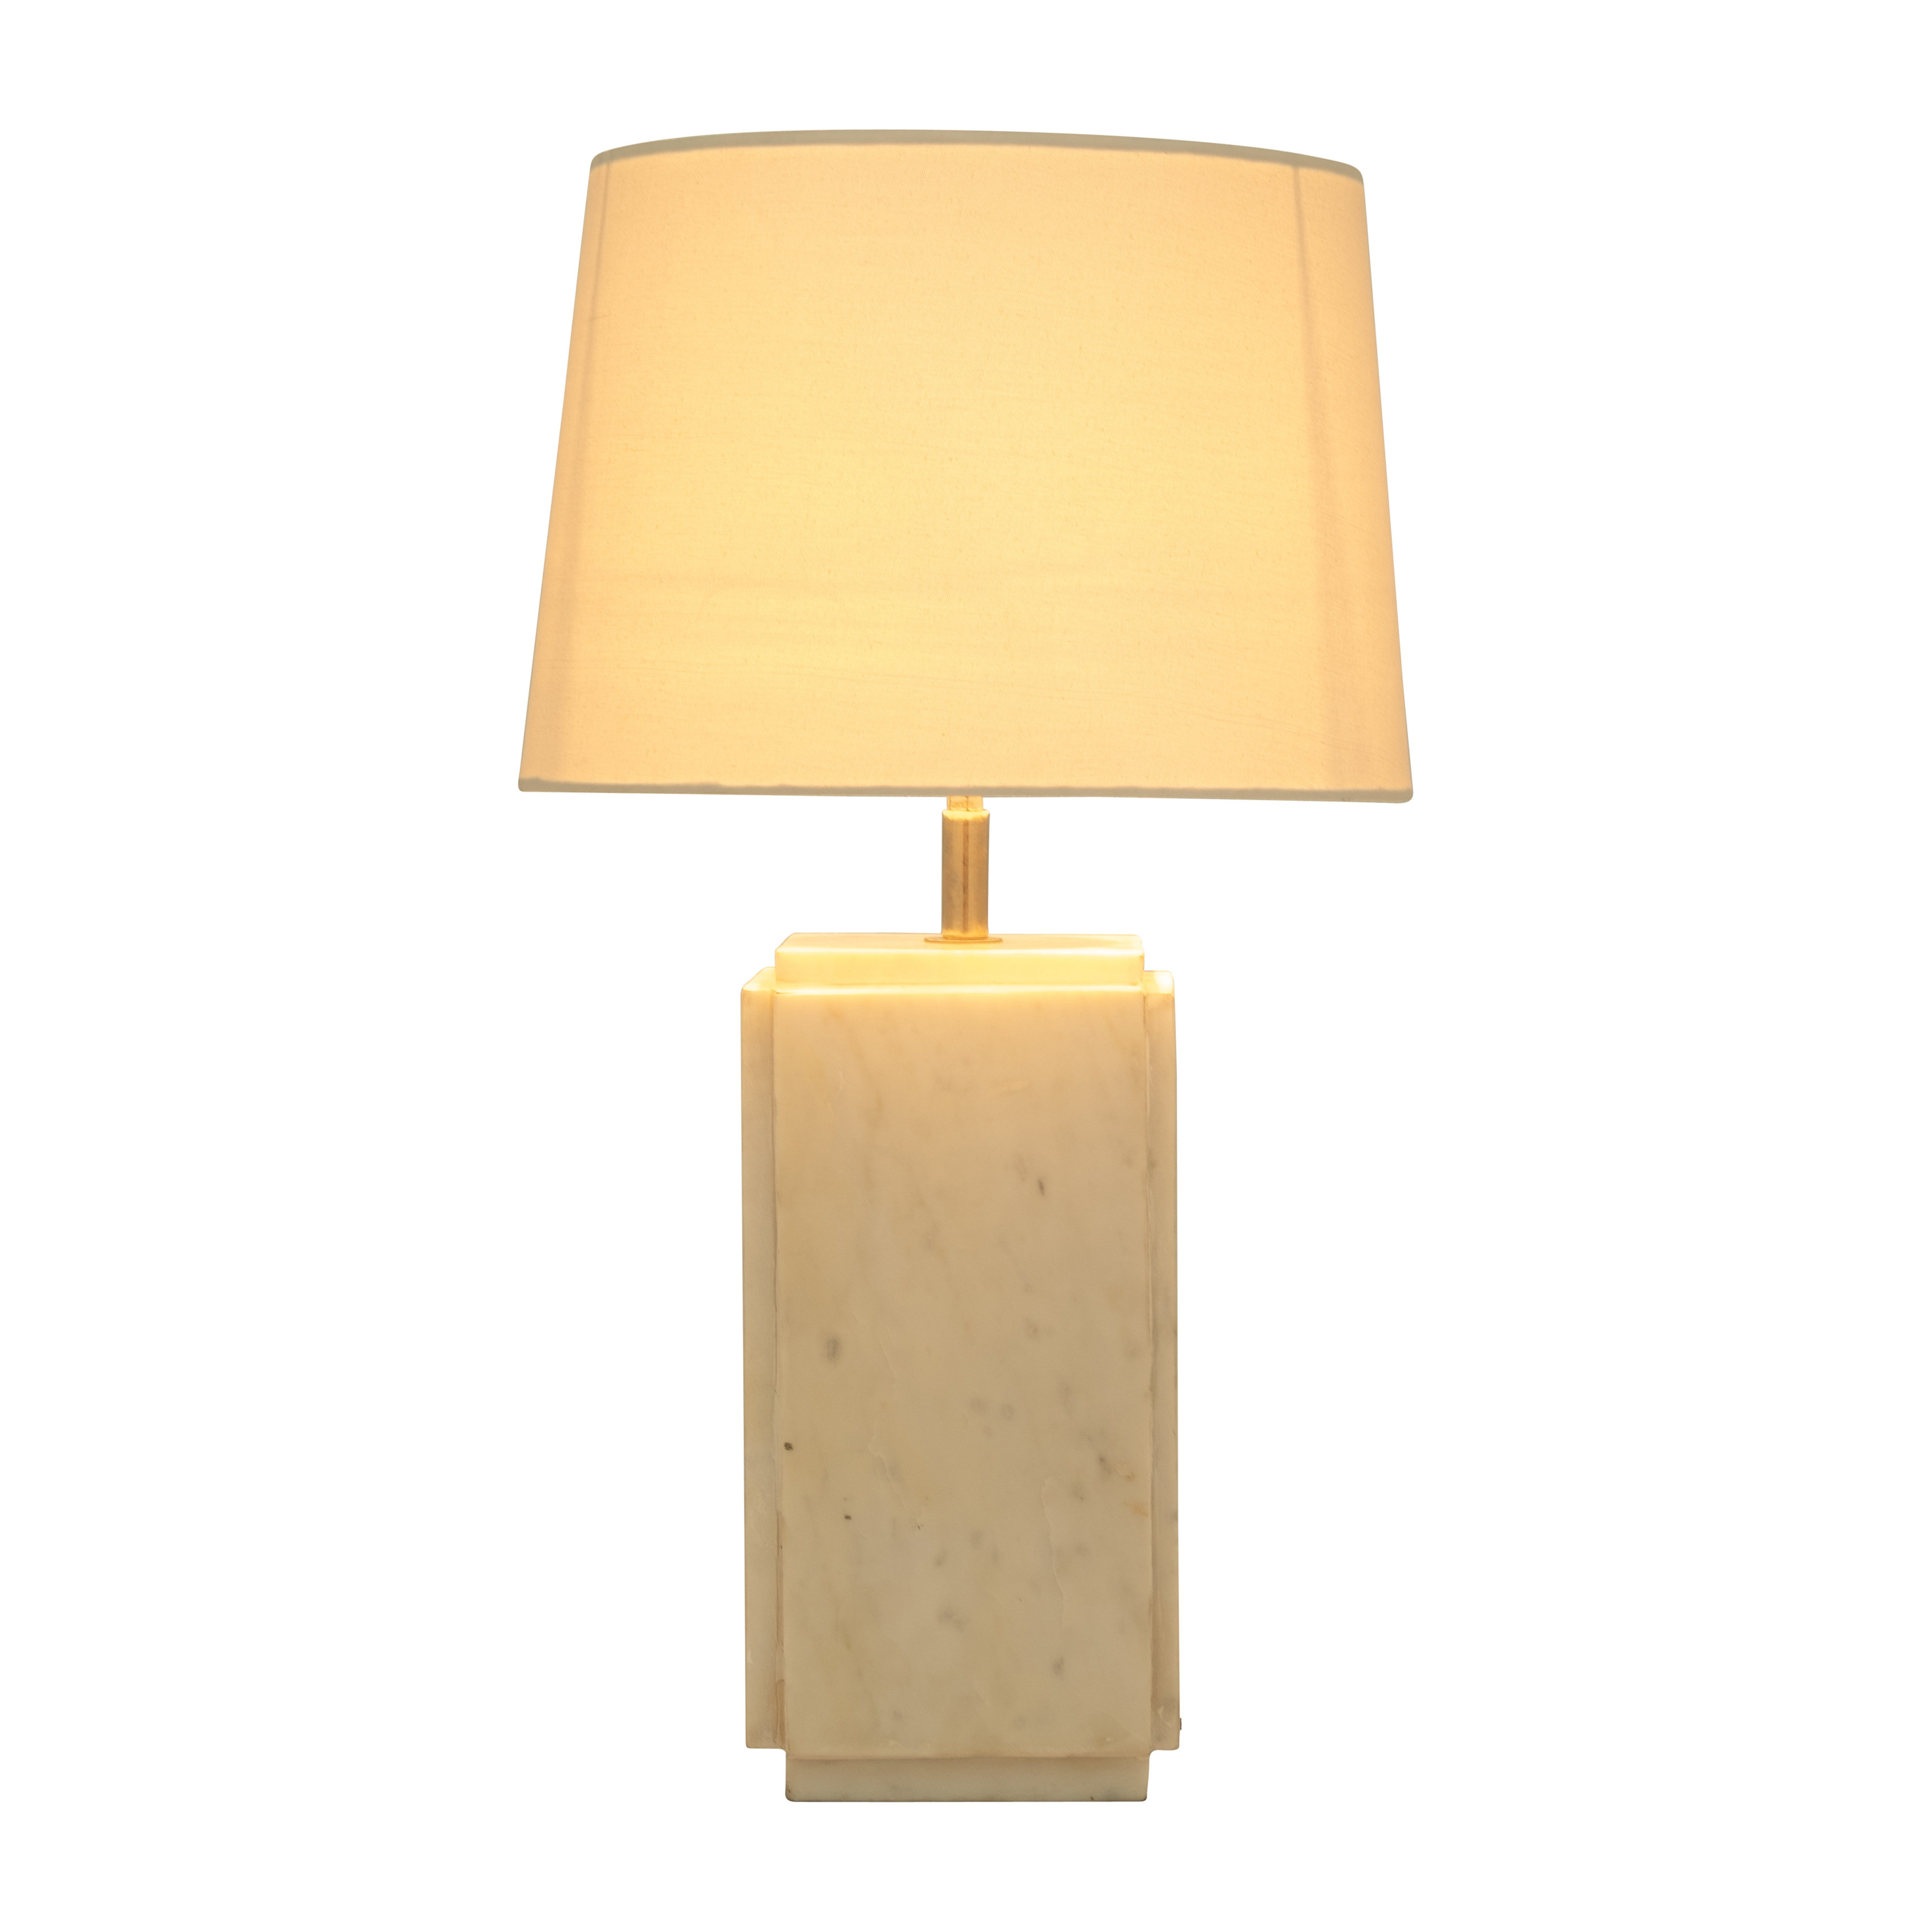 Vintage Marble Base Brass Column Table Lamp With Shade